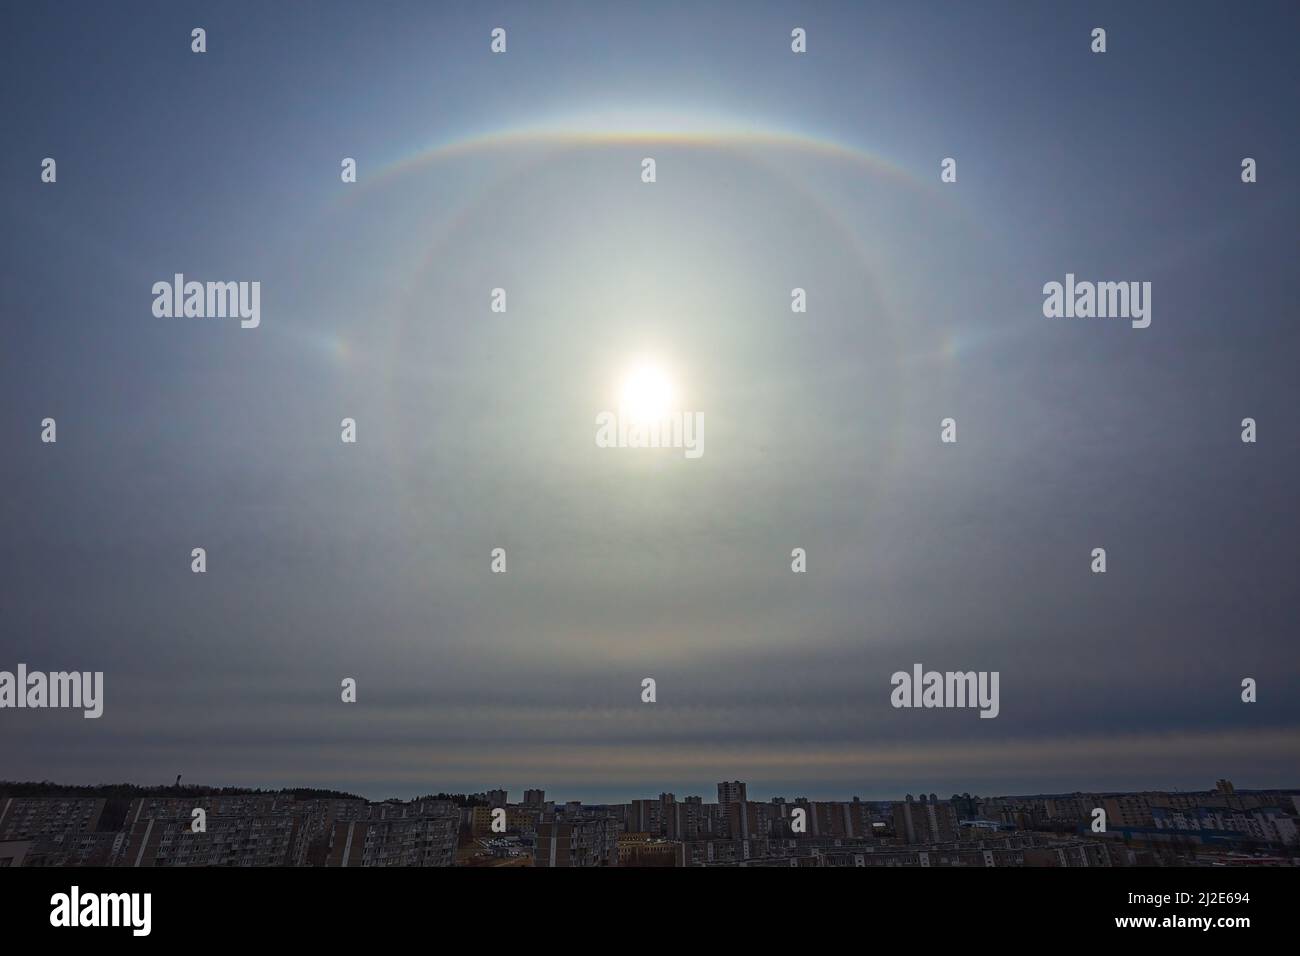 Very rare atmospheric phenomenon called sun halo, Various sun halos arc appearing in the sky in the city Stock Photo